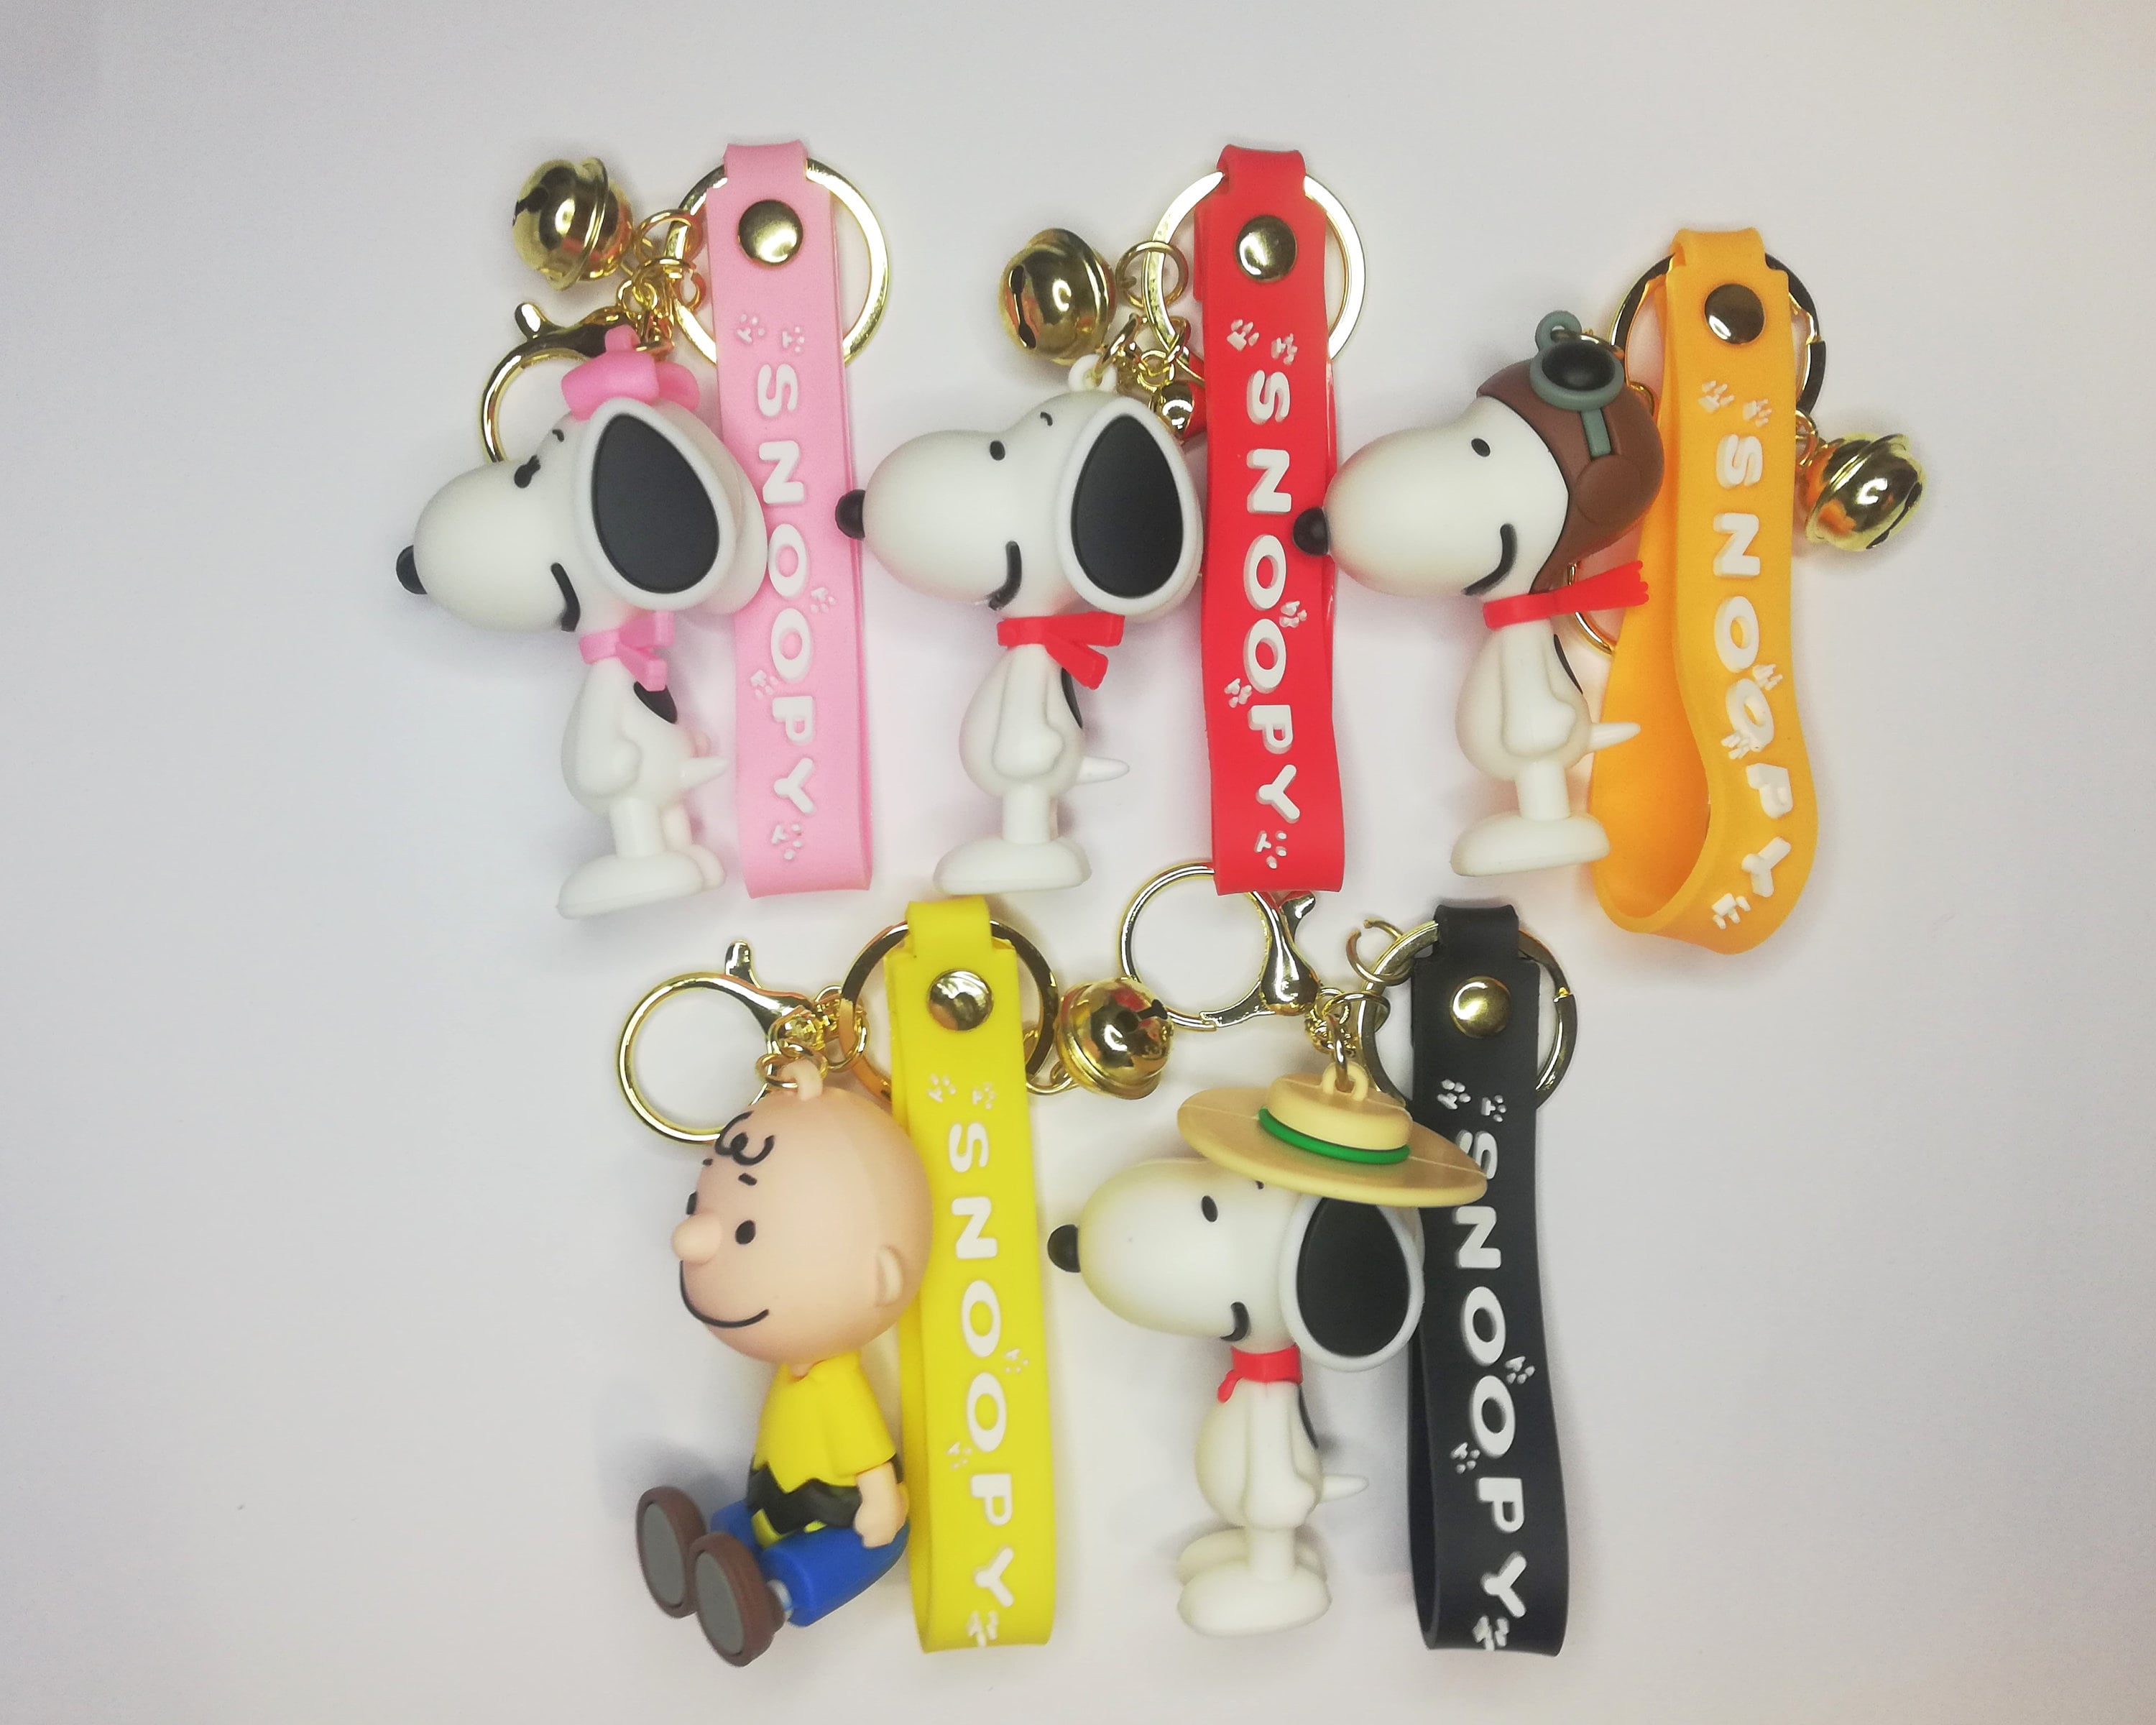 Snoopy and His Friends Keychain With Charms Woodstock Key Ring-belle With  Best Friend Key Chain Be Mine Key Chain 